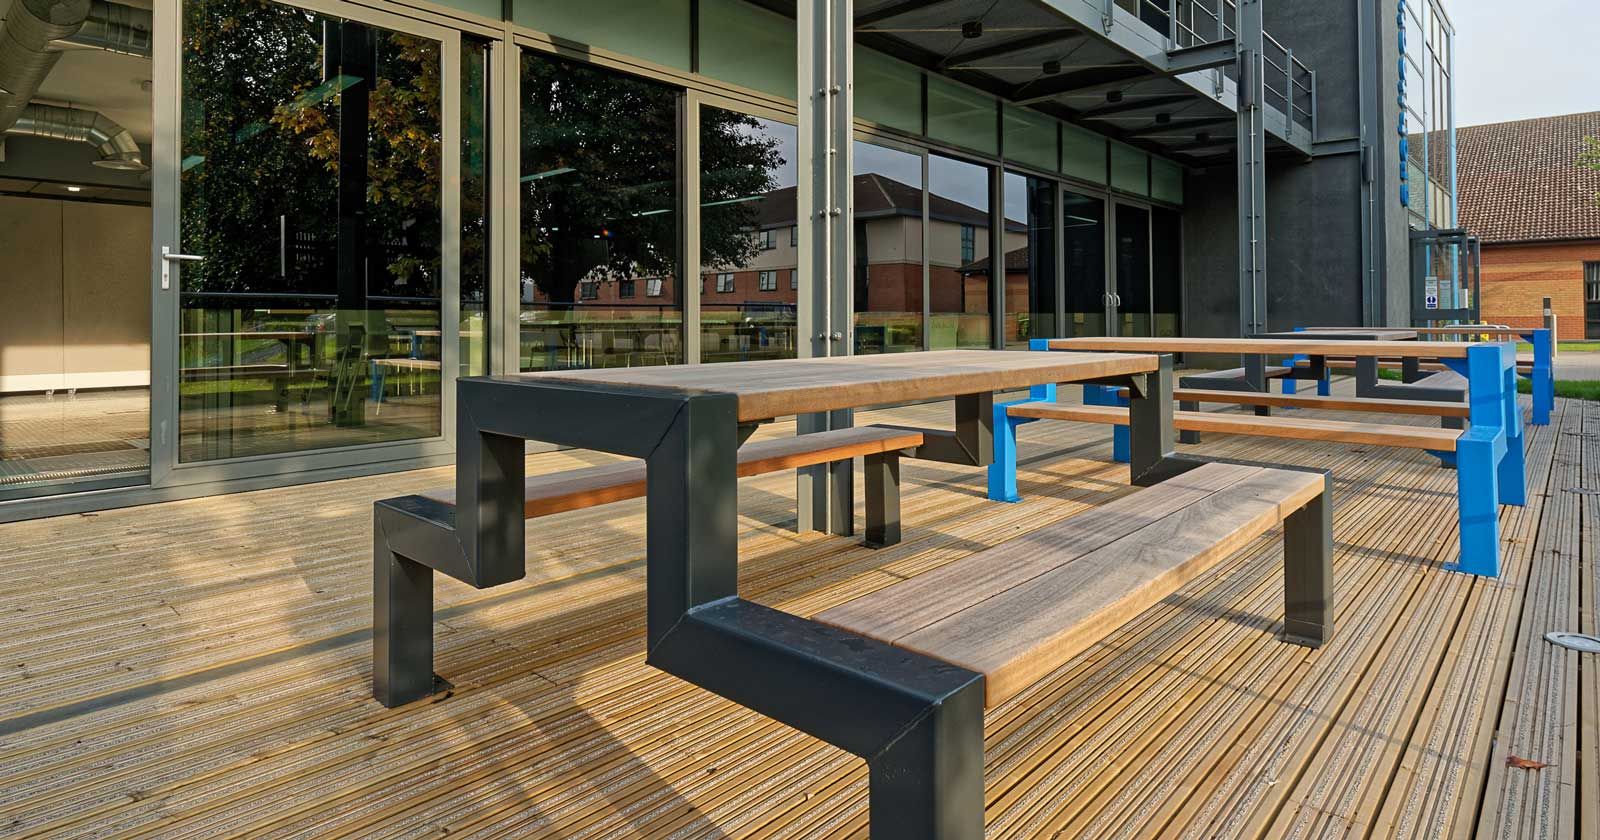 Loughborough-University-School-of-Architecture-Refit-outside-seating-area-by-APSS